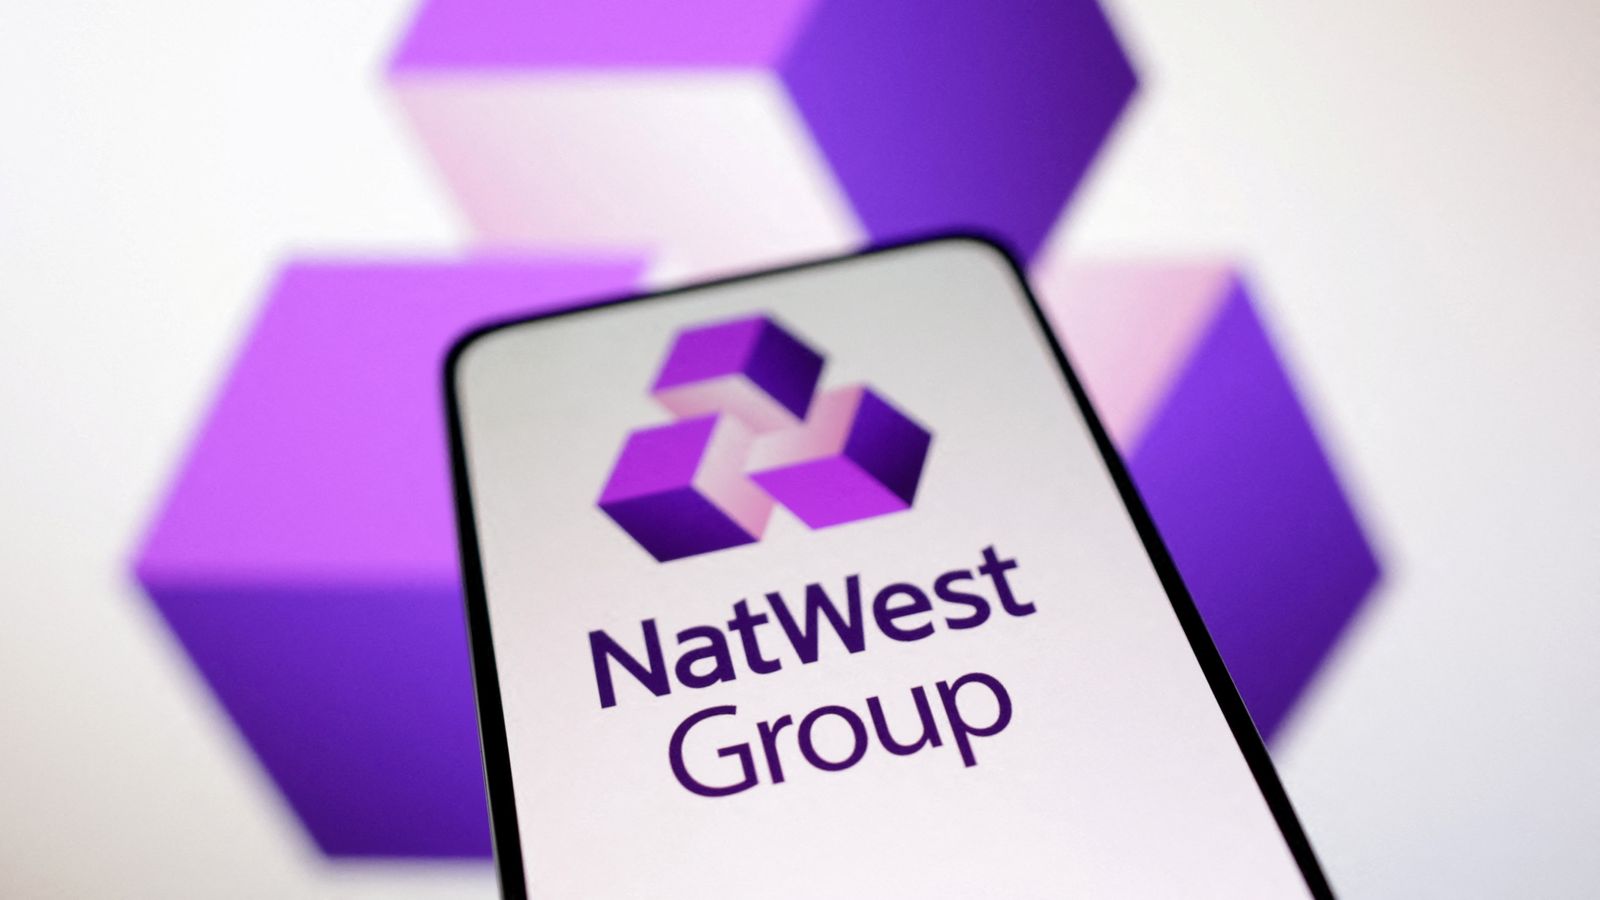 NatWest to pay out £350m bonus pot as ministers prepare share sale